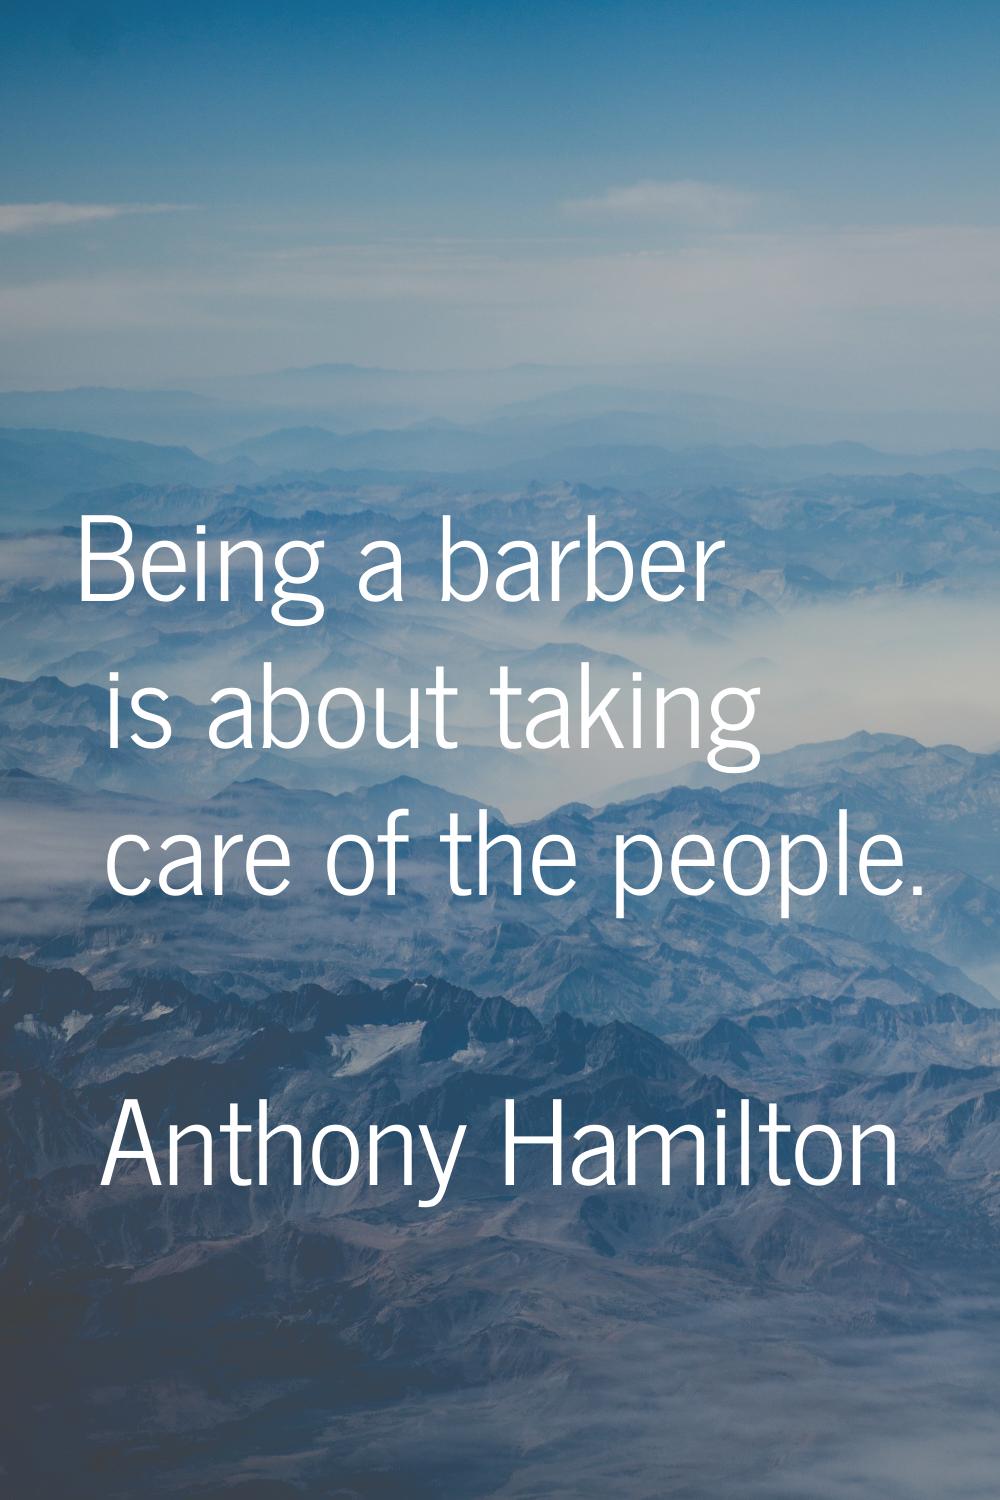 Being a barber is about taking care of the people.